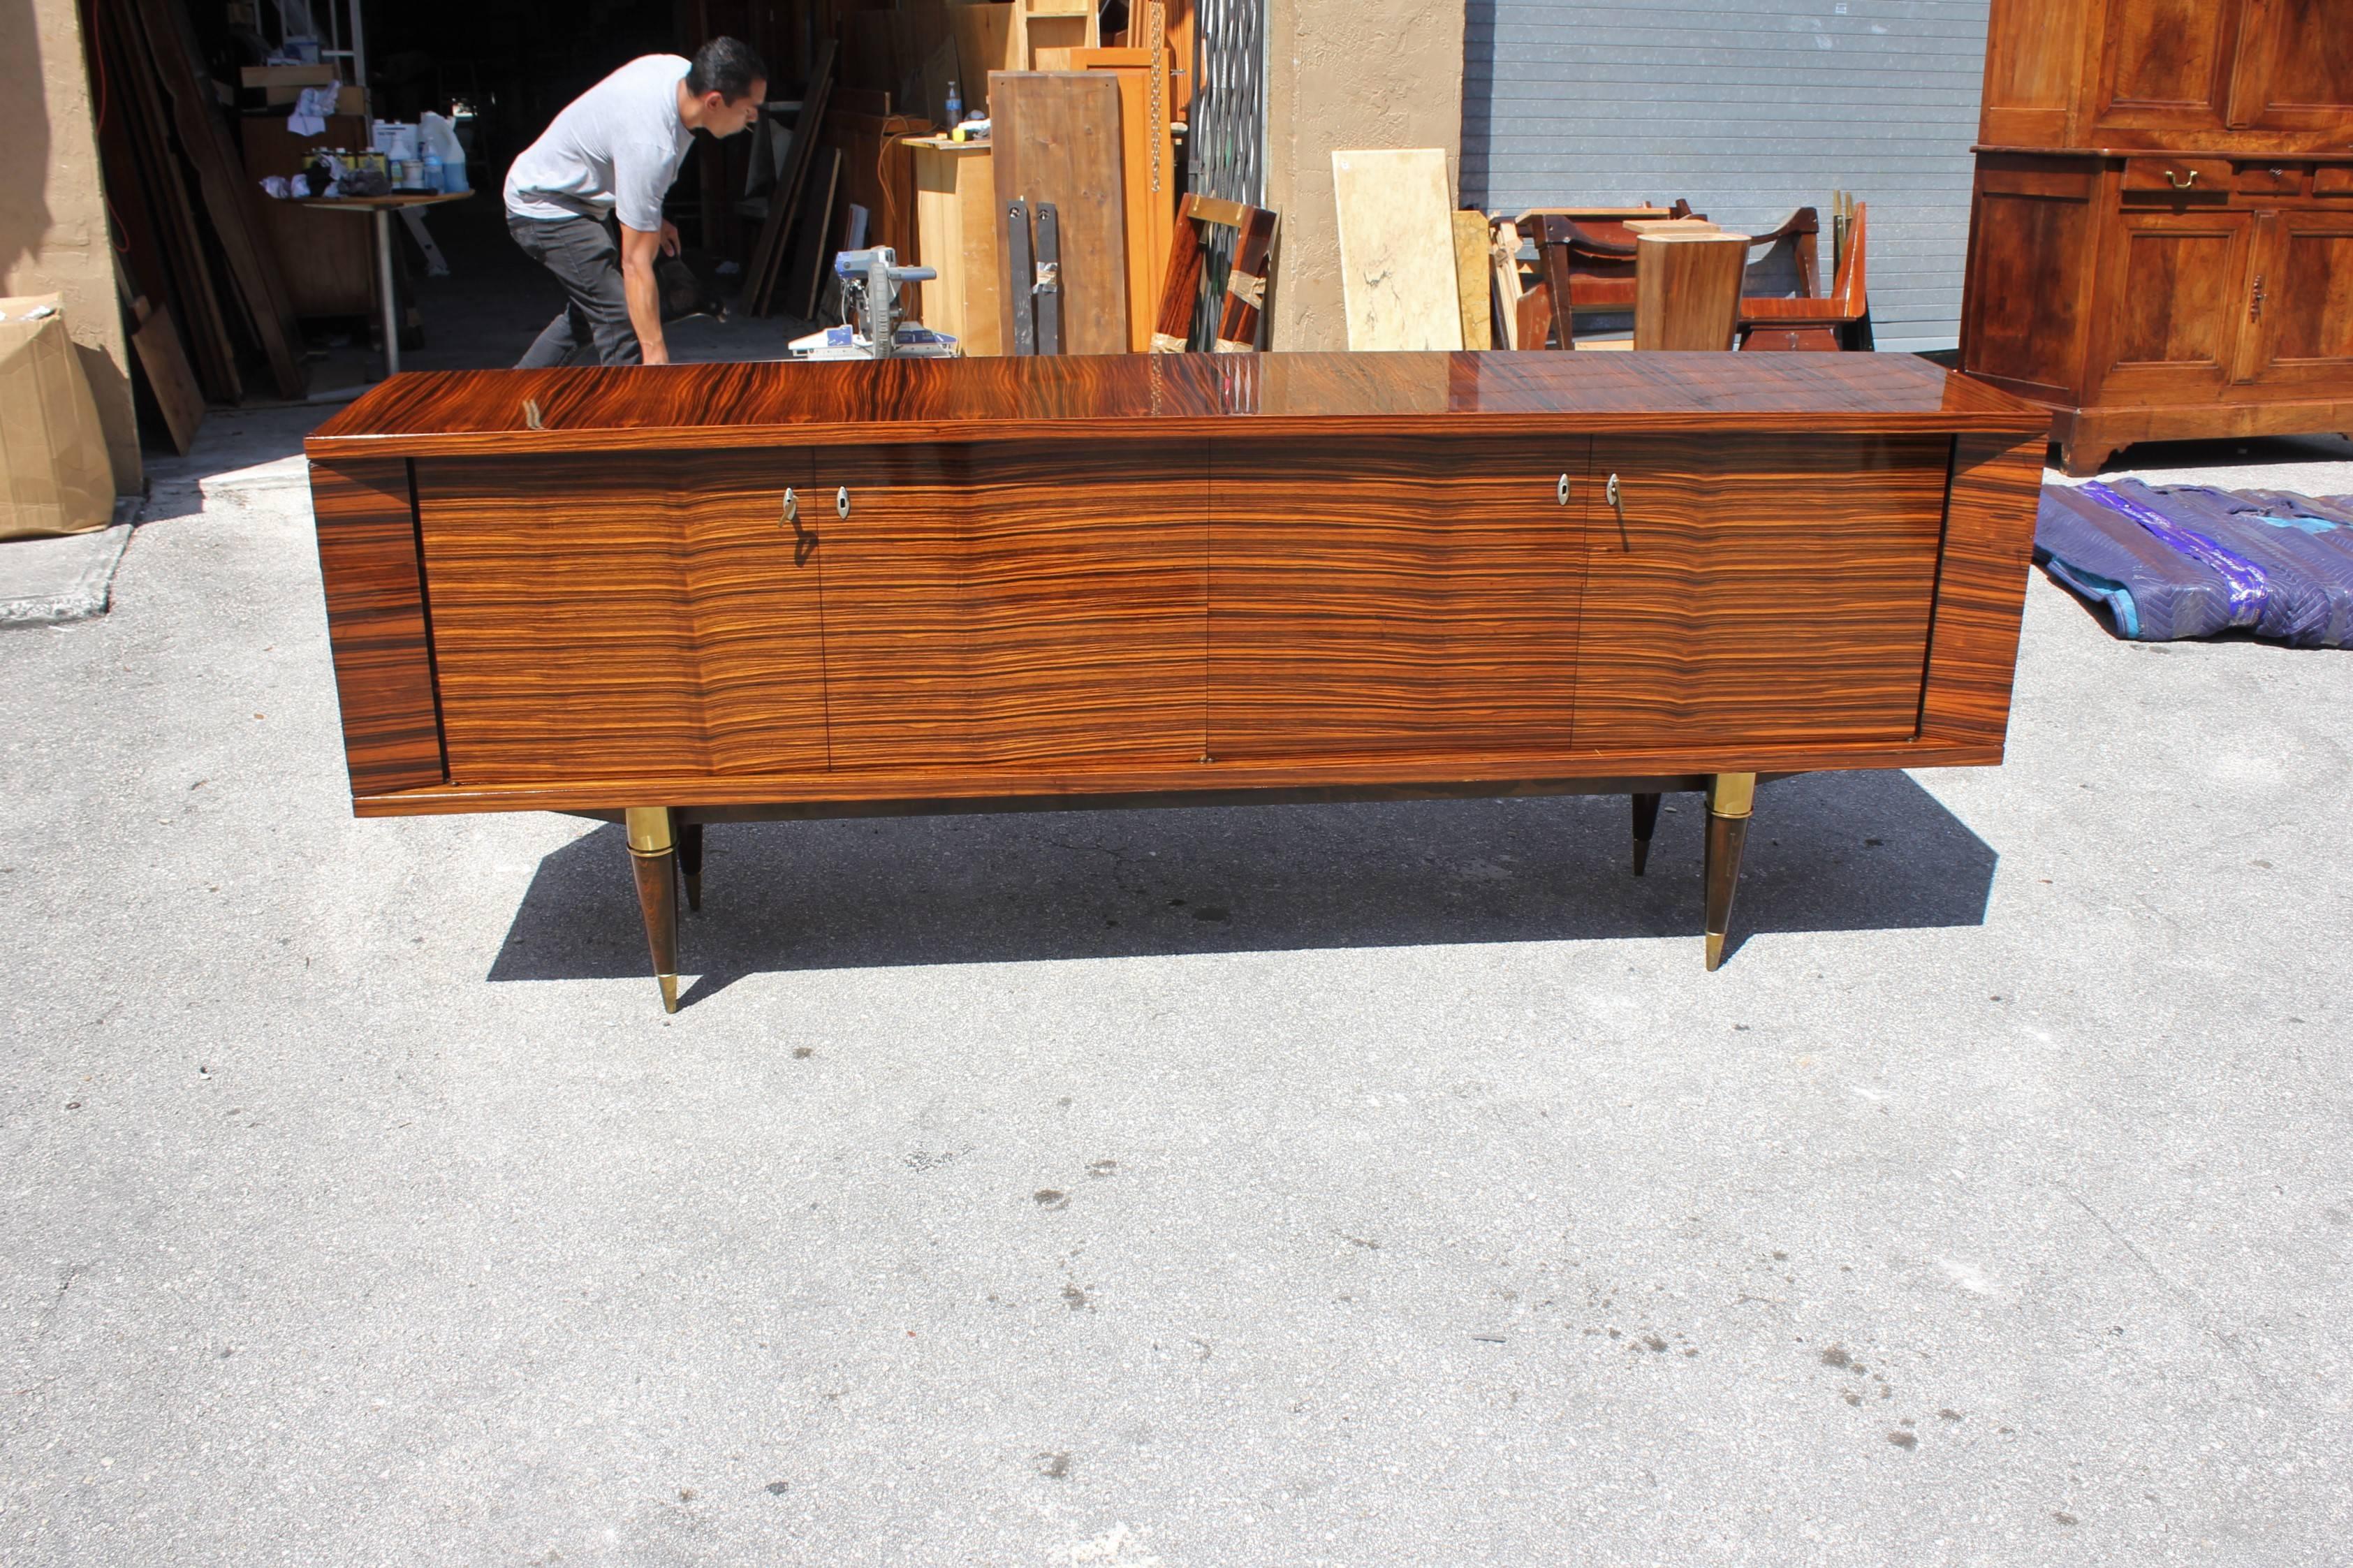 Description beautiful French Art Deco exotic Macassar ebony sideboard / buffet, circa 1940s. Very nice sideboard, the sideboard are in very good condition, with two drawers inside and all three shelves adjustable and you can remove the shelves if